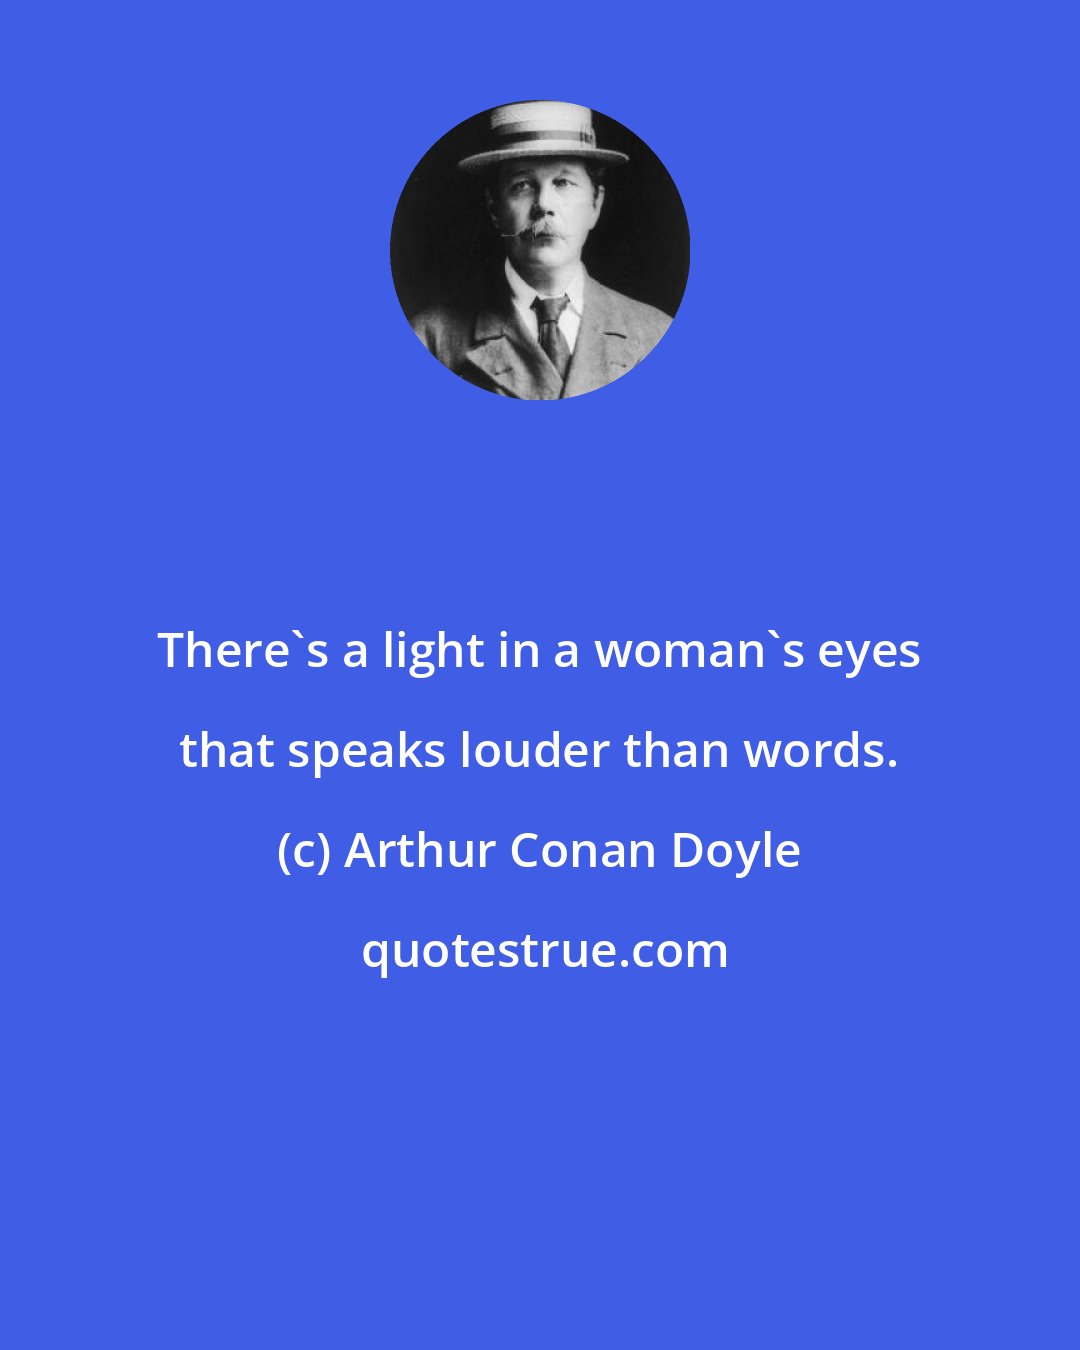 Arthur Conan Doyle: There's a light in a woman's eyes that speaks louder than words.